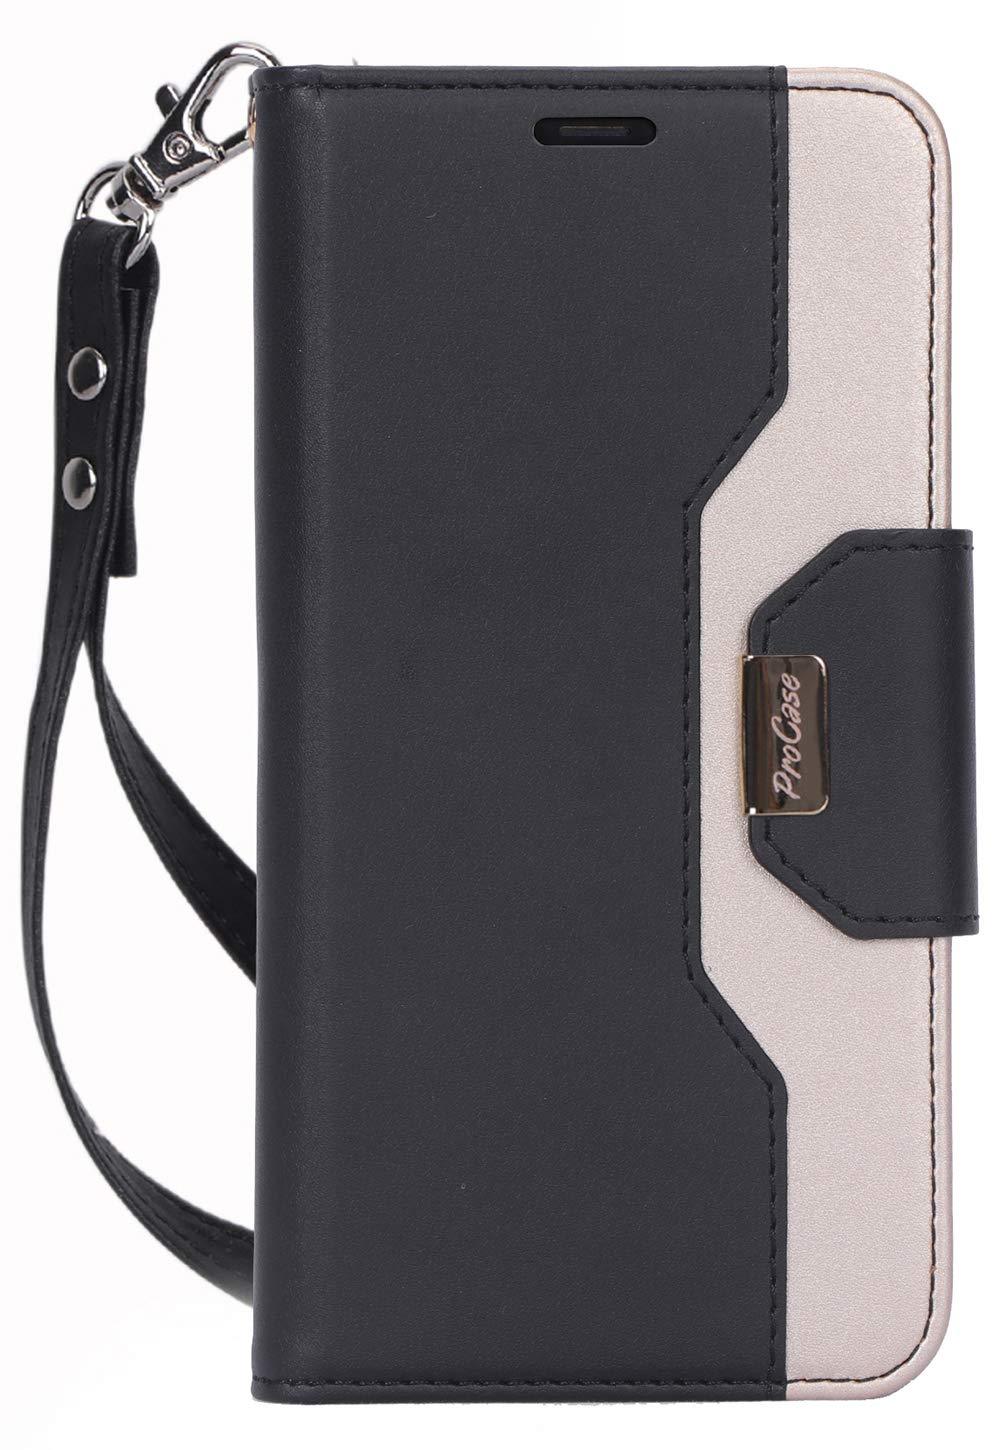 iPhone 11 Pro Max 2019 Wallet Case for Women